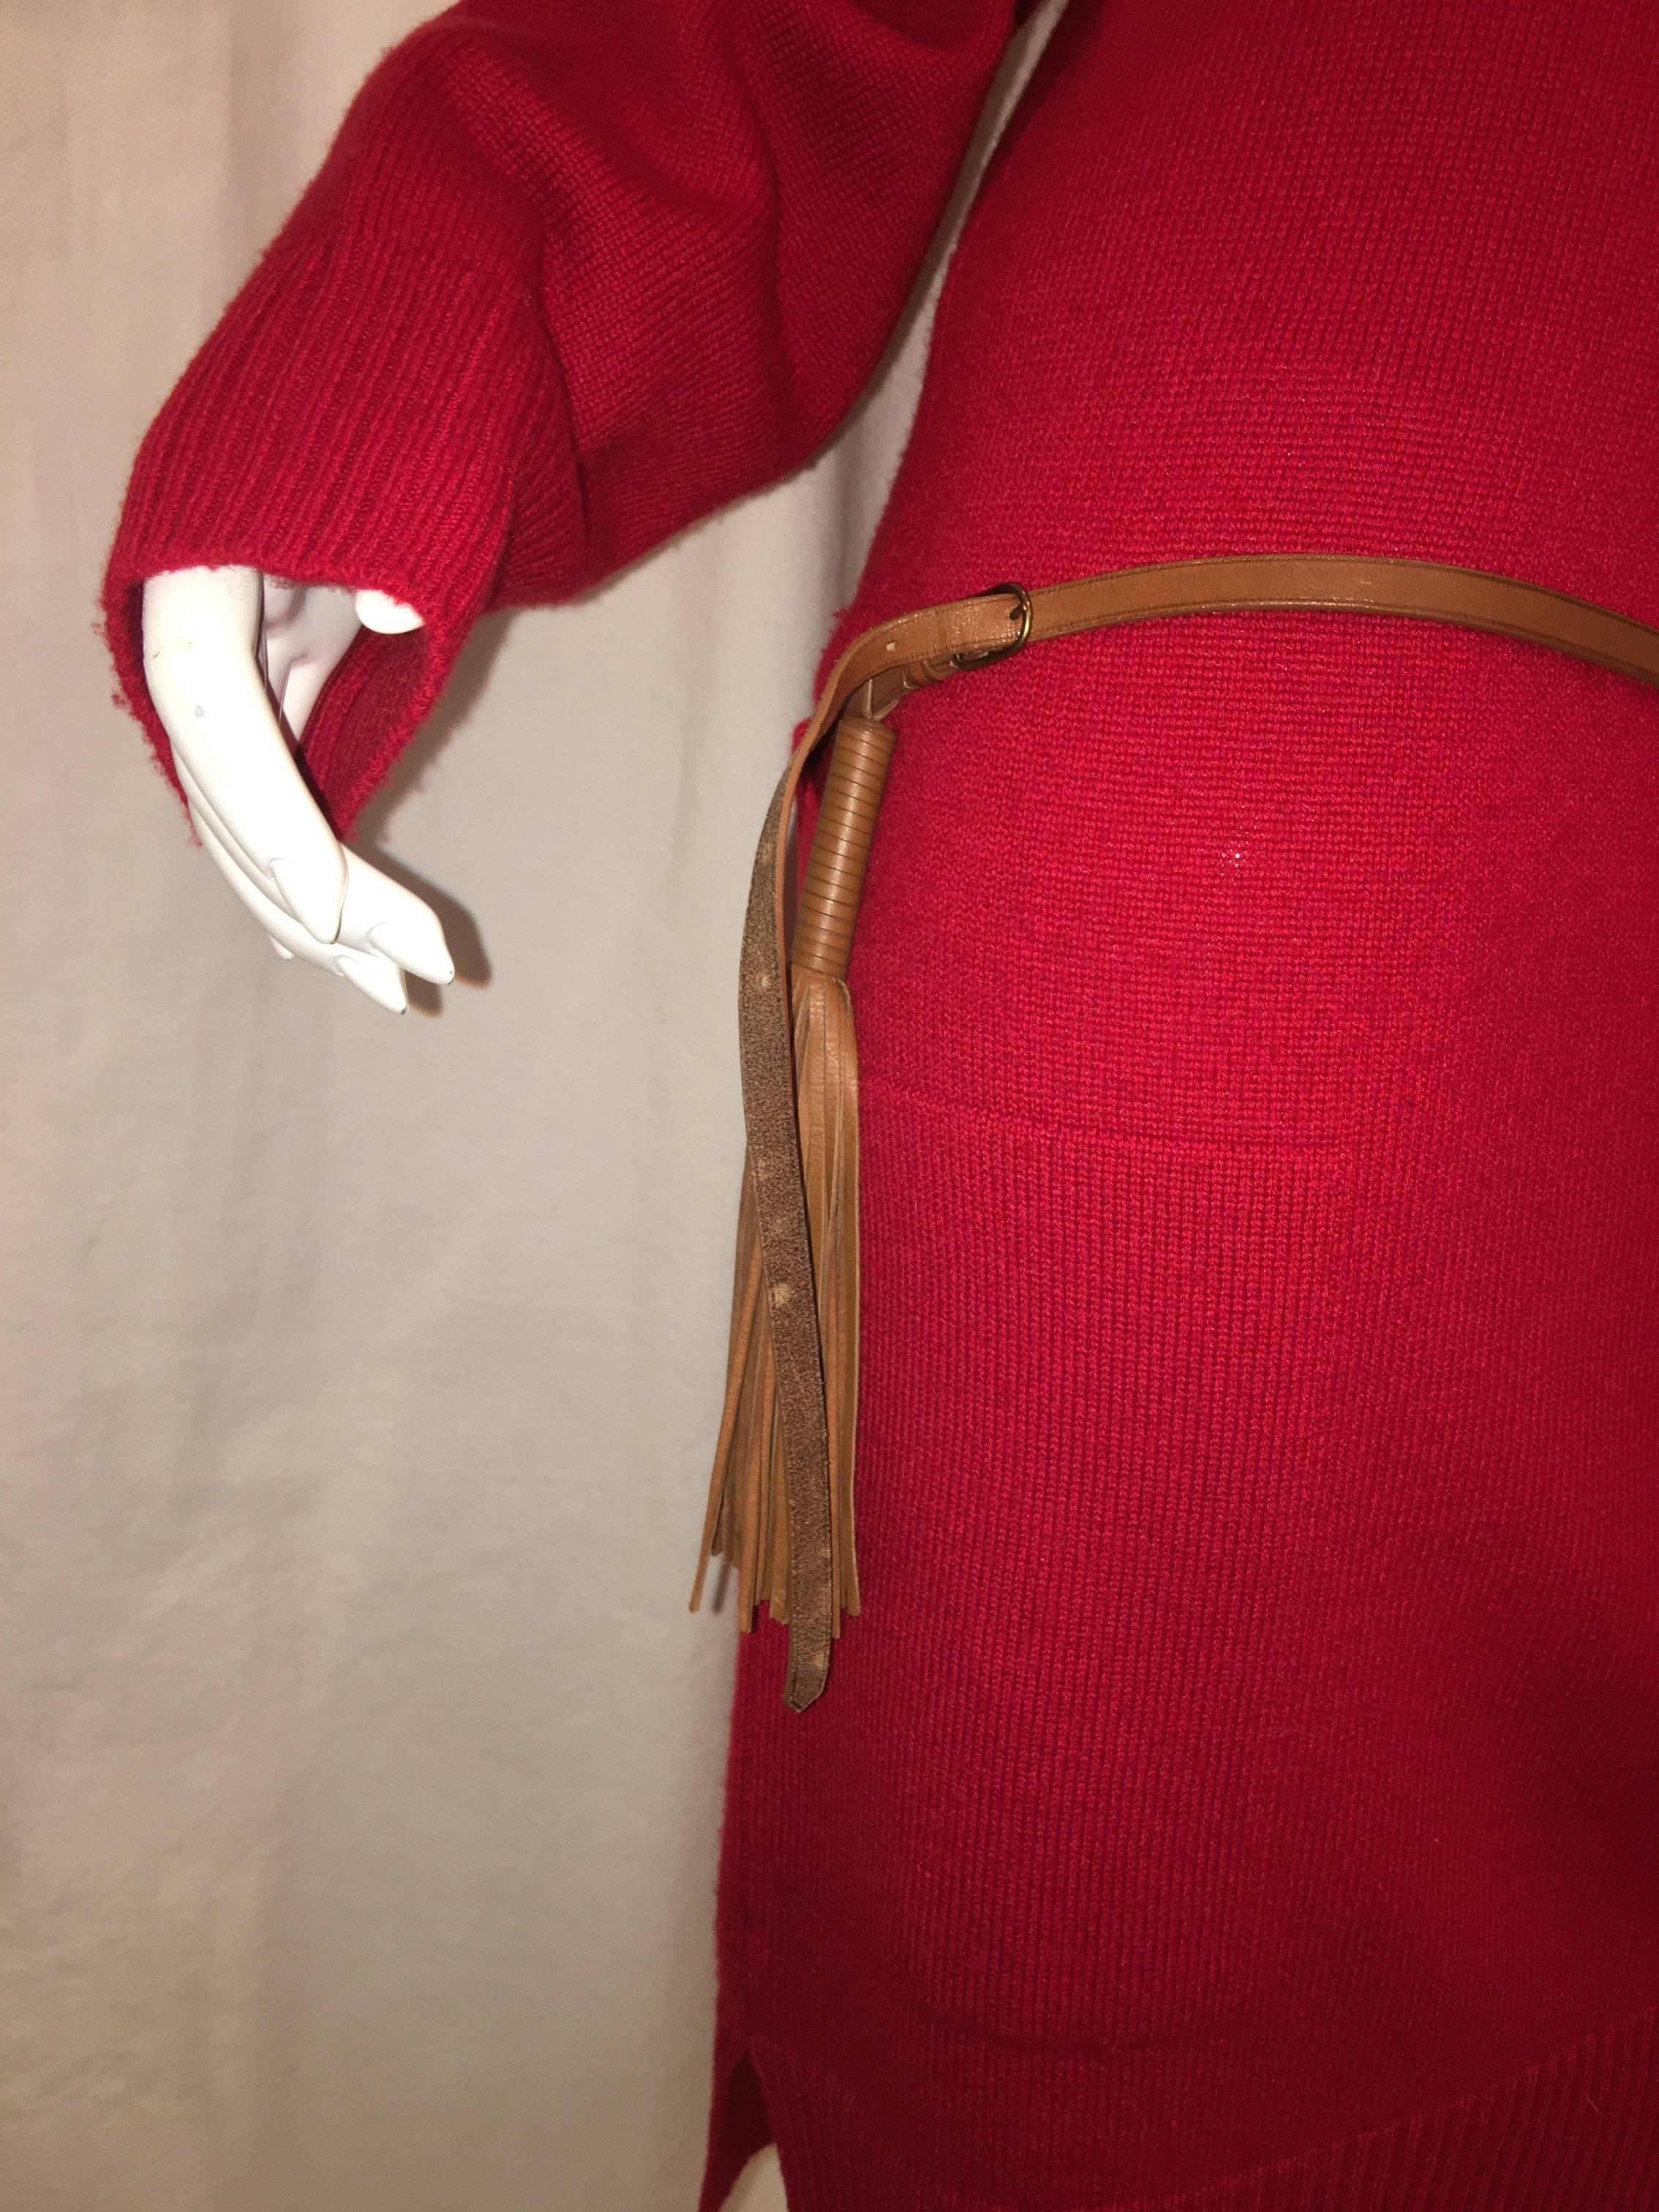 Hermes Long Sleeve Cashmere Sweater Dress with Belt and Boatneck.